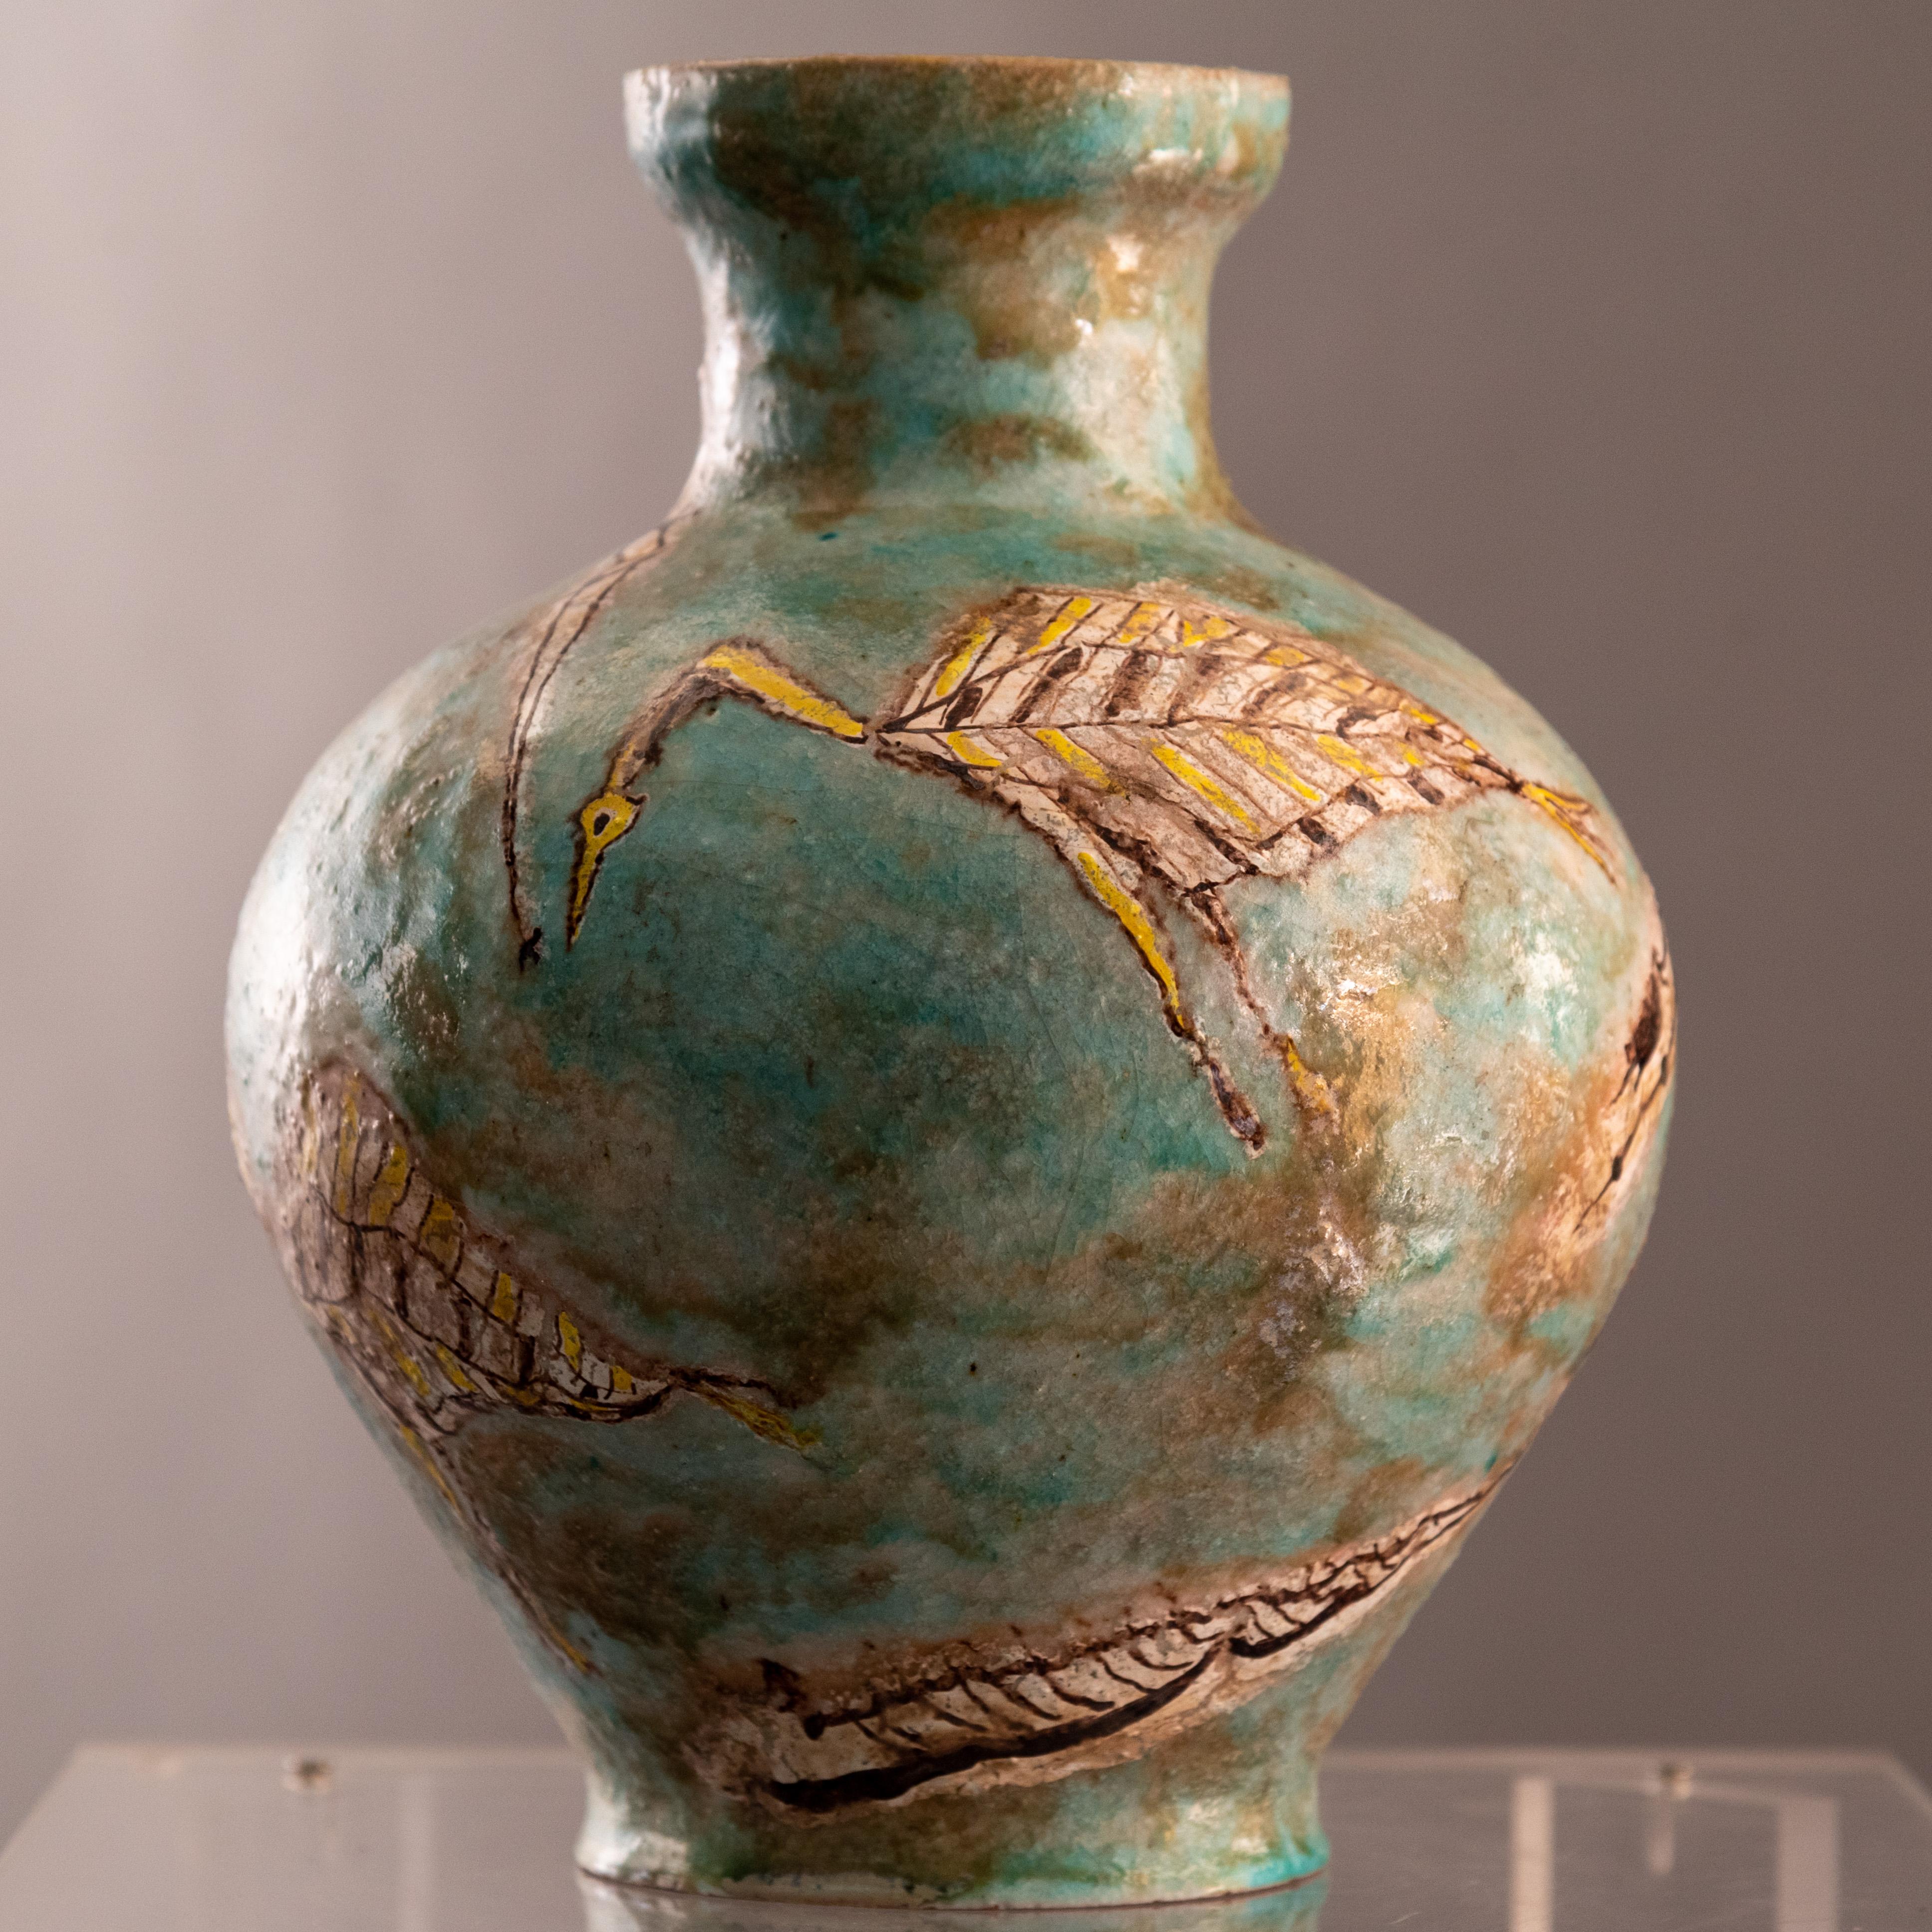 Stoneware vase with green-gray background glaze and patterns primarily in browns and yellows. Zauli Faenza Reference number AG001160CZ from the general archive of the artist Claudio Zauli 

This artwork, never before on the market, comes from an